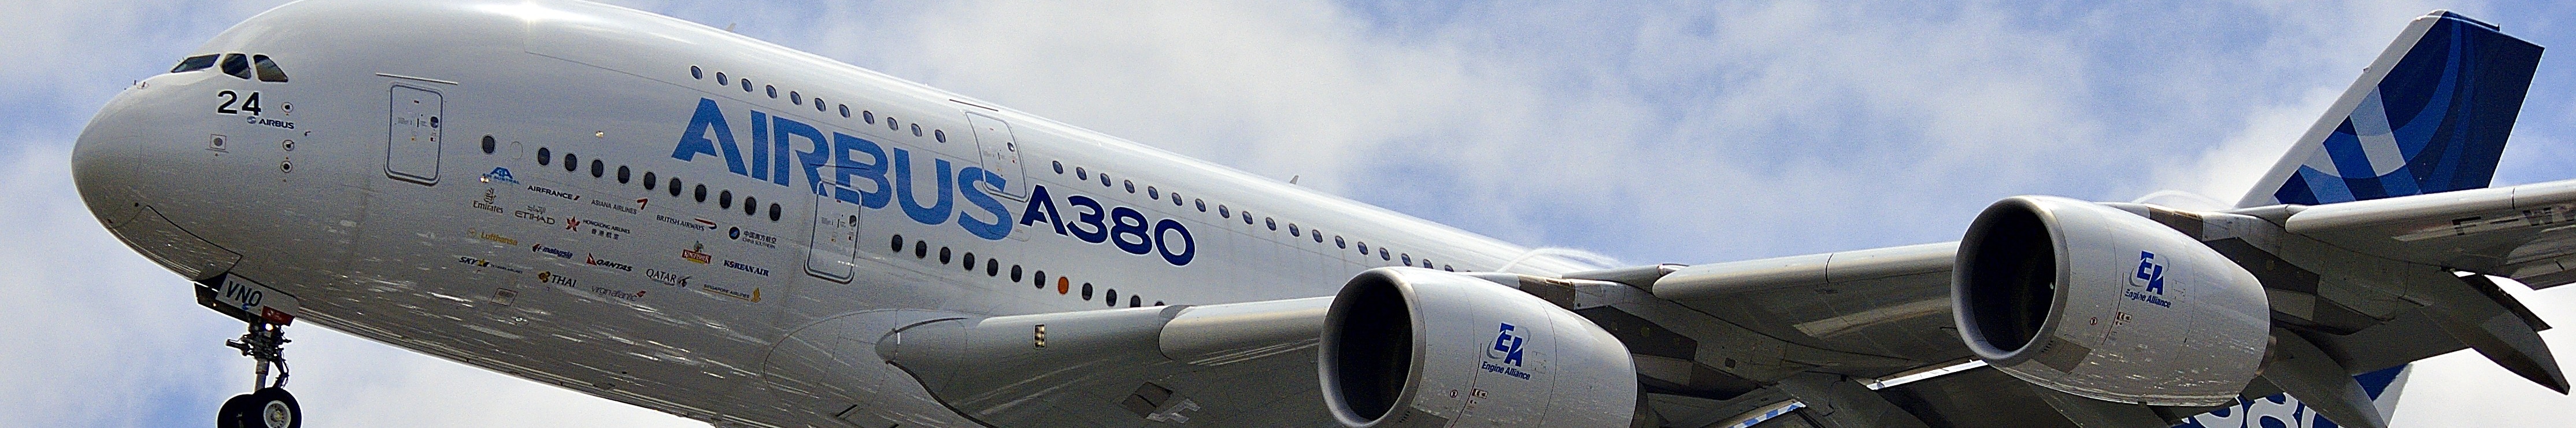 In 2021, Airbus employs 126,495  people contributing to economic growth and social stability.